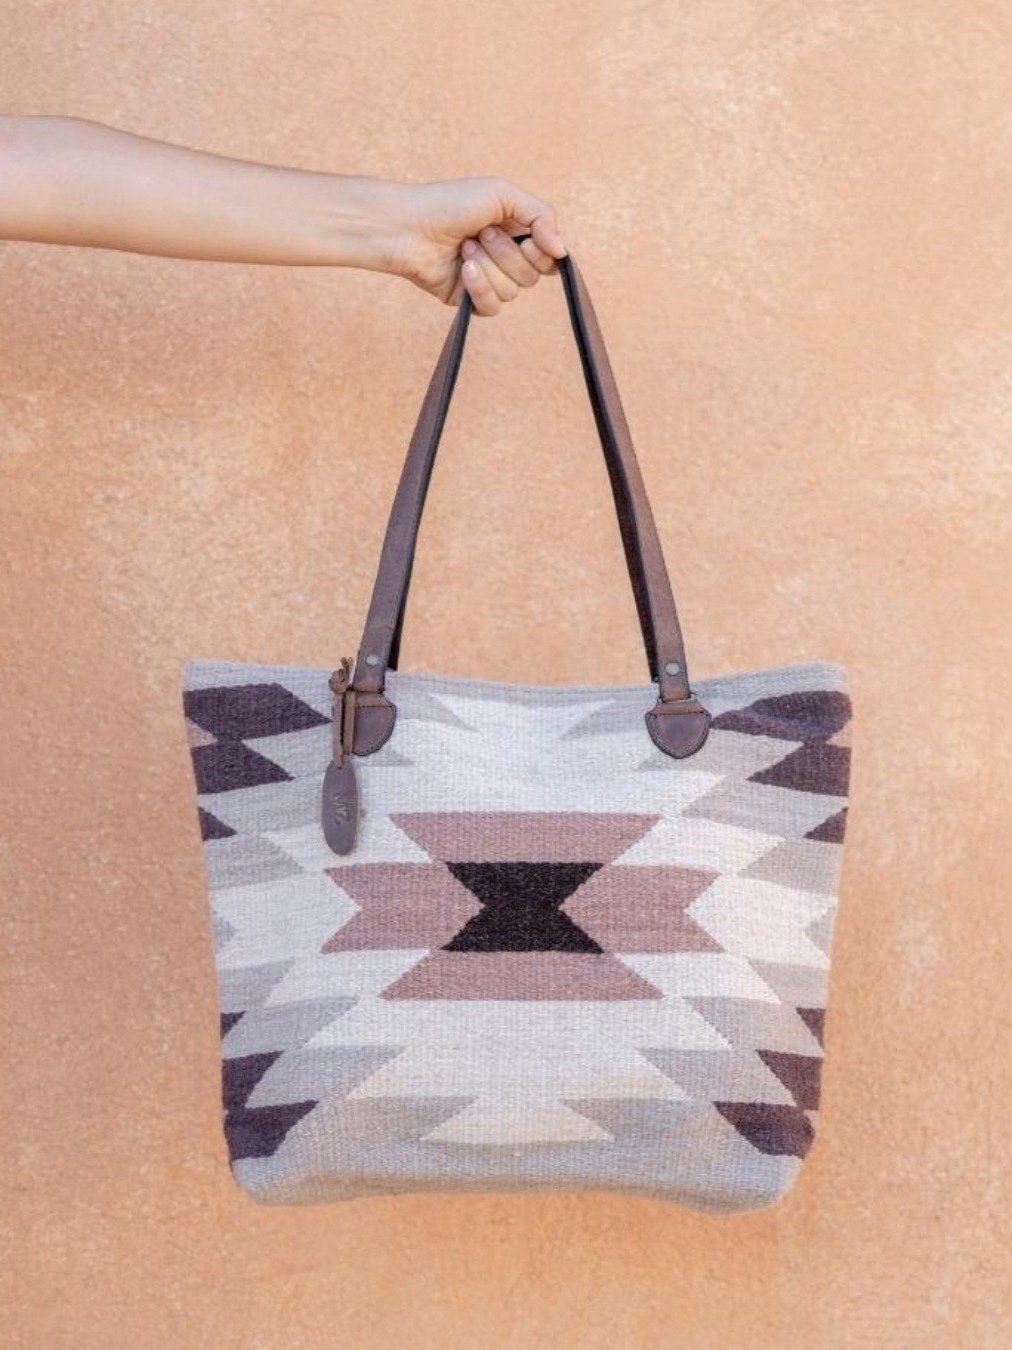 10 Affordable Purses Made From Recycled Materials